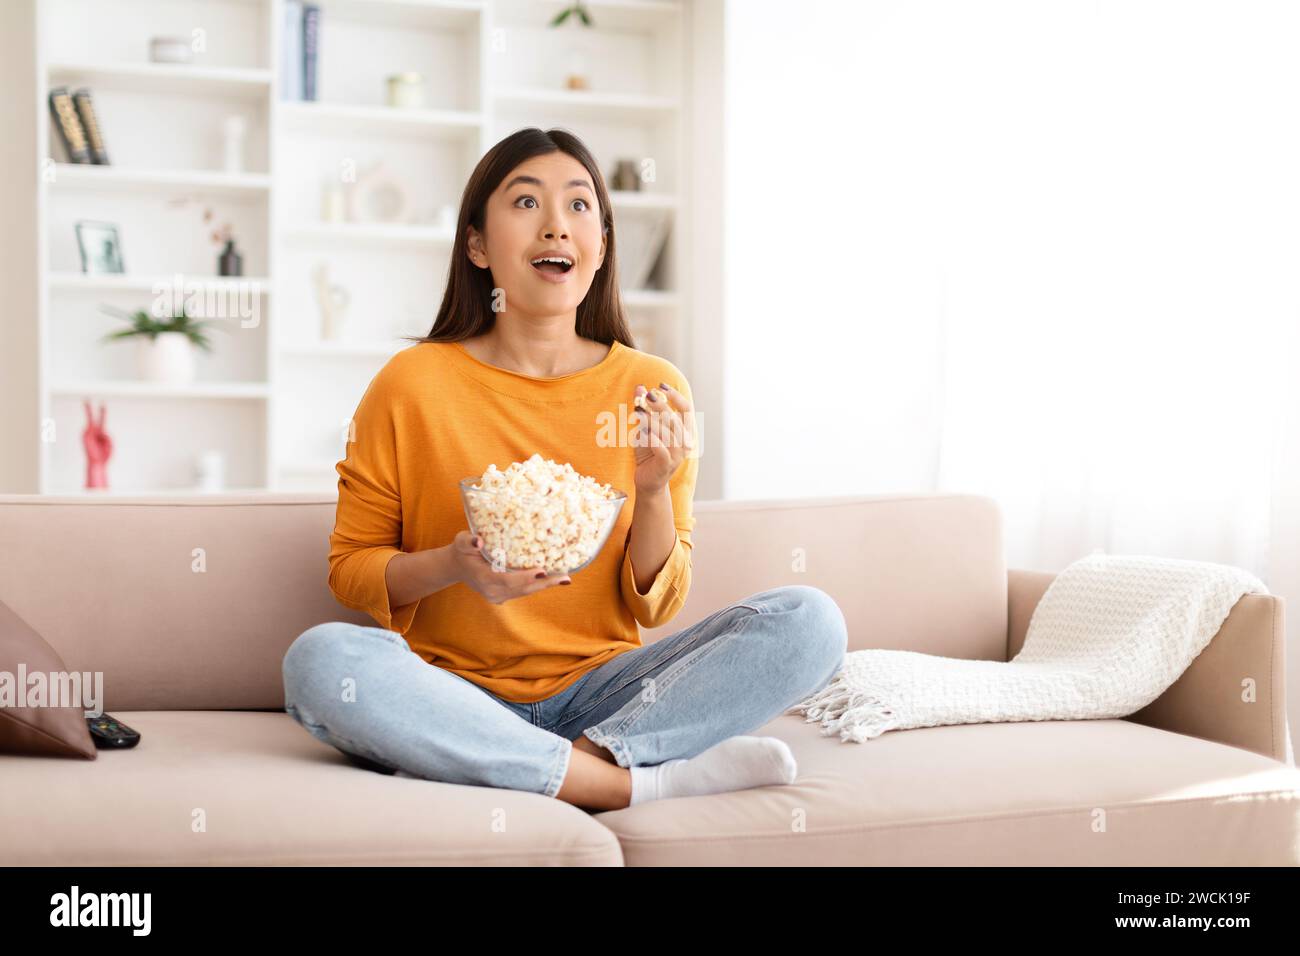 Amazed young asian woman watching movie or Tv program Stock Photo